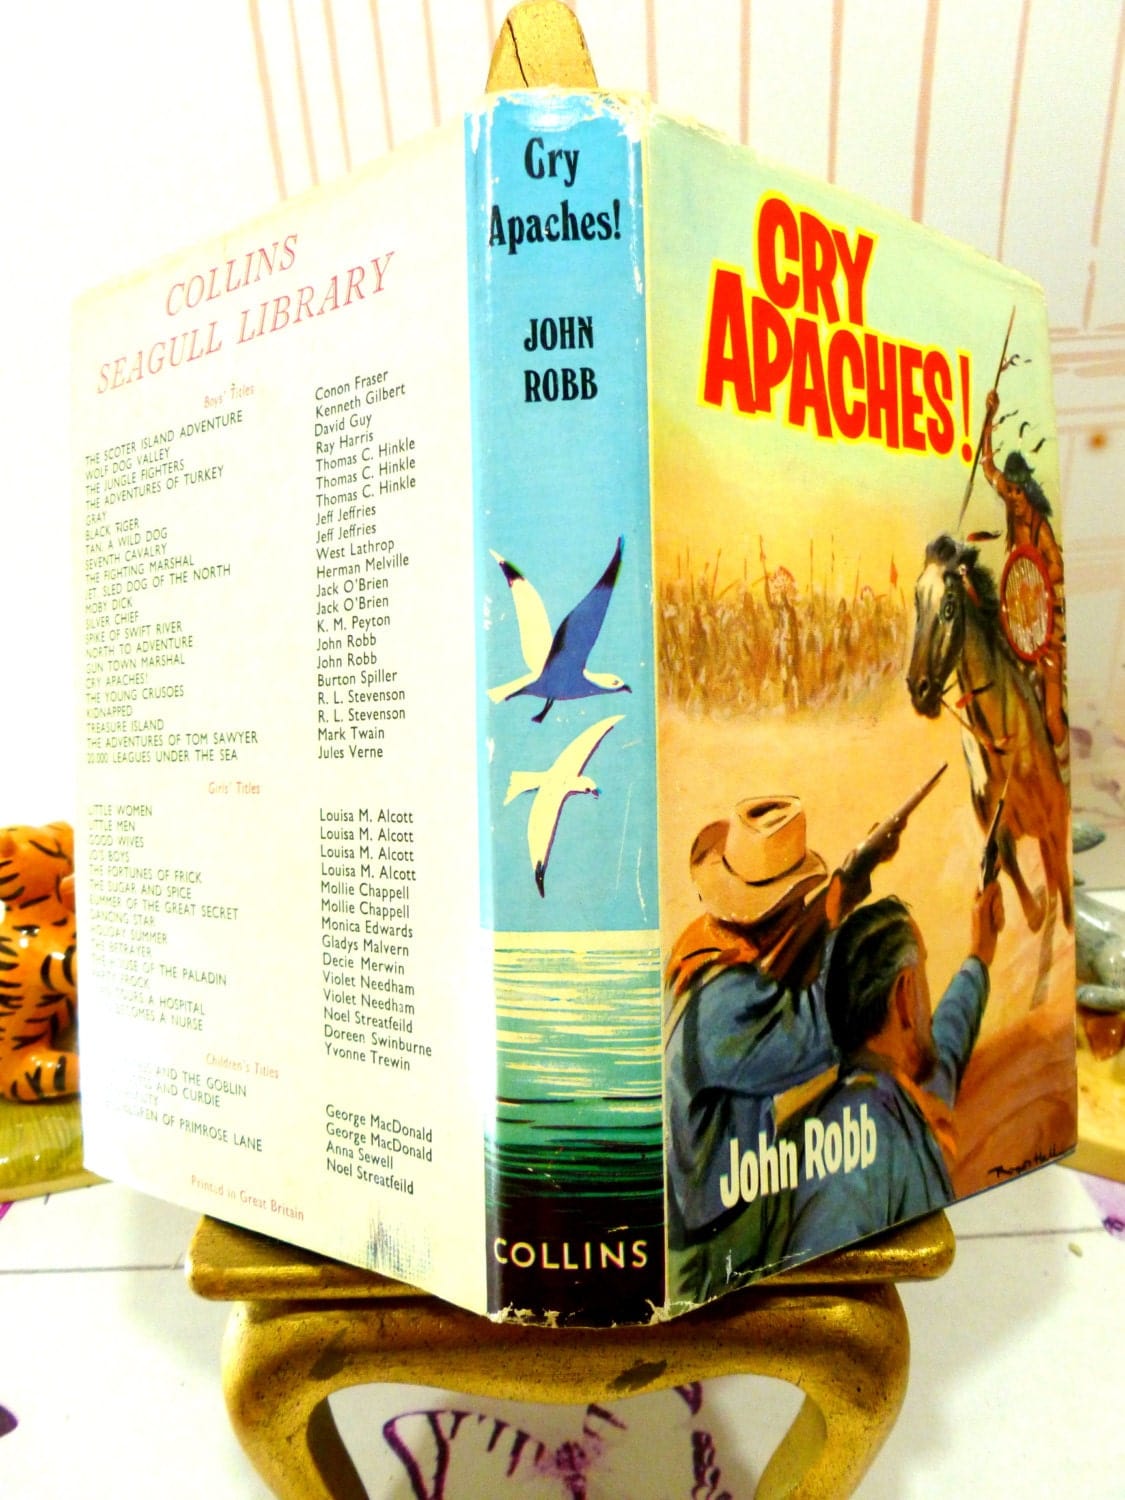 Full cover of Cry Apache Catsfoot Cowboy Stories 1960s Vintage Hardback chldren's book showing cowboys fighting an Indian and other titles from the series on the back cover. 